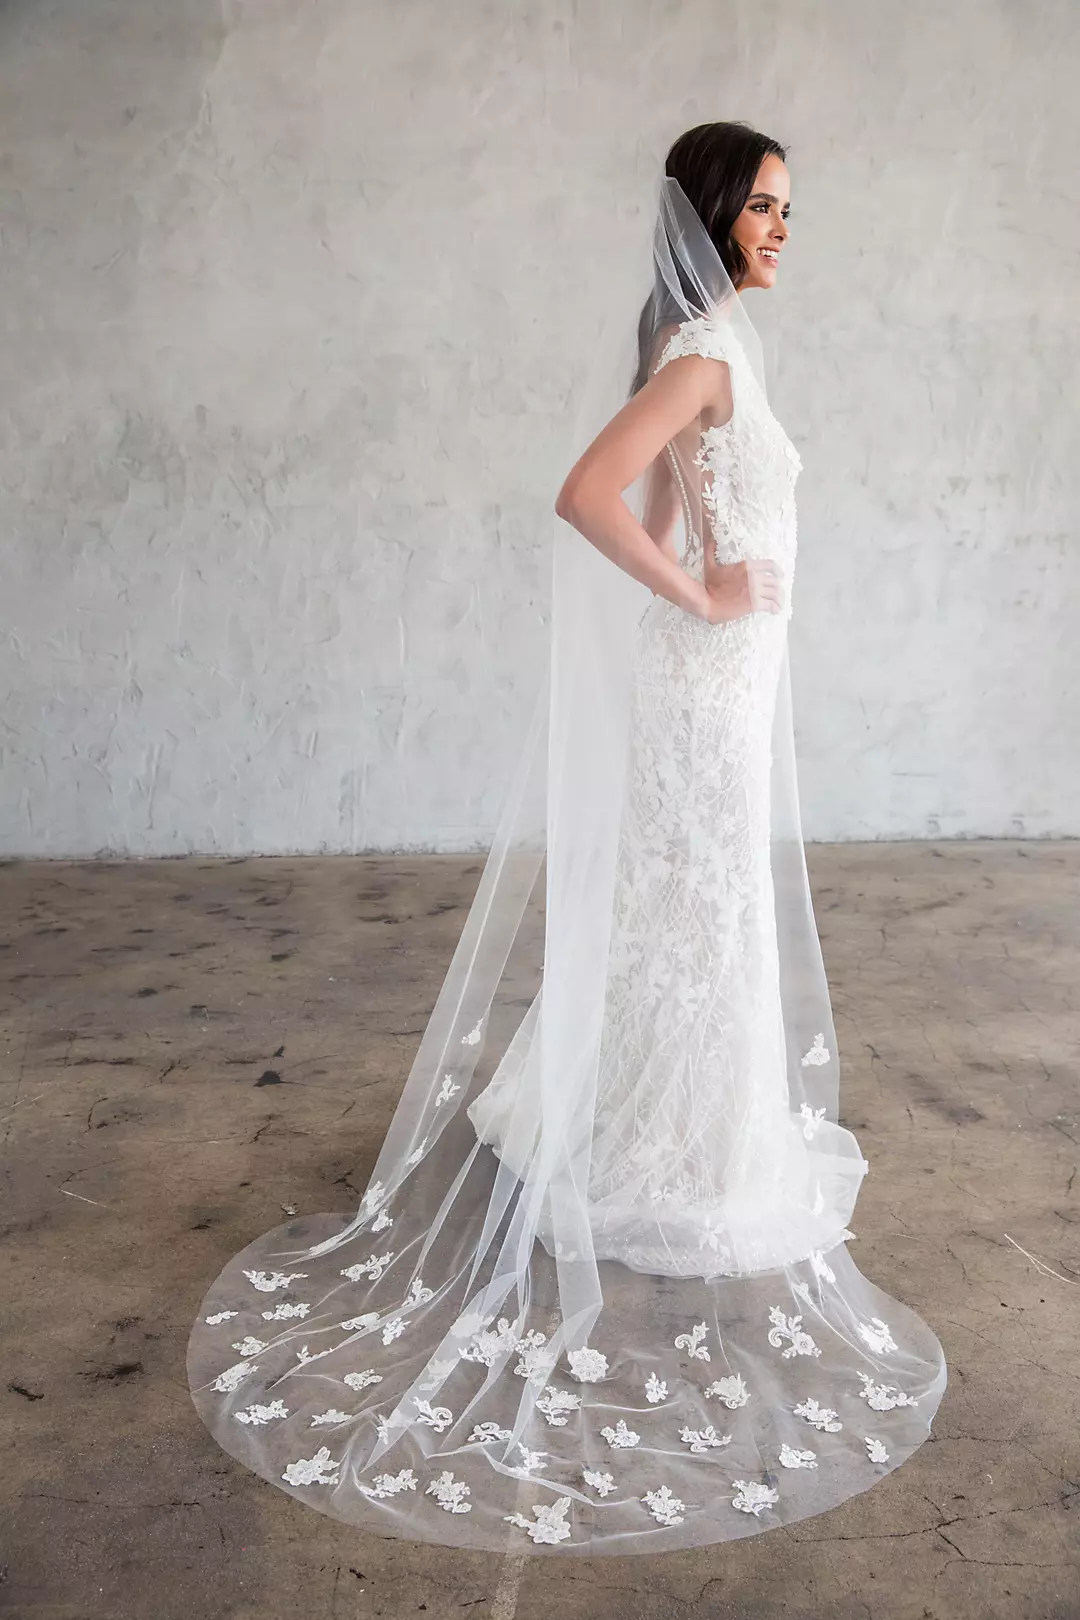 Scattered Floral Lace Tulle Chapel Veil Image